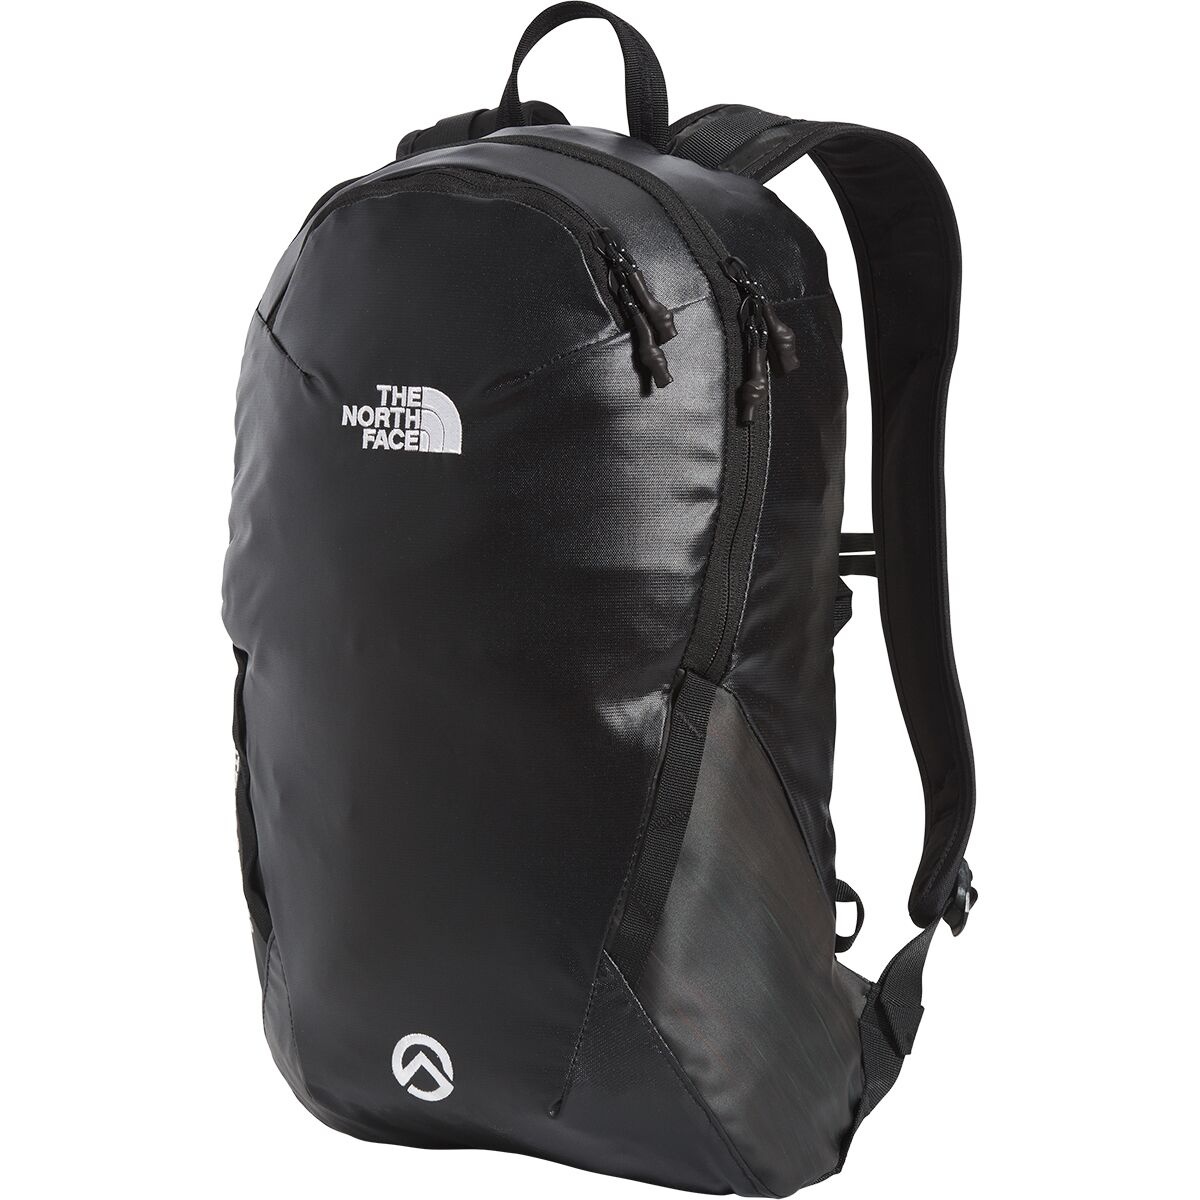 The North Face Route Rocket Review